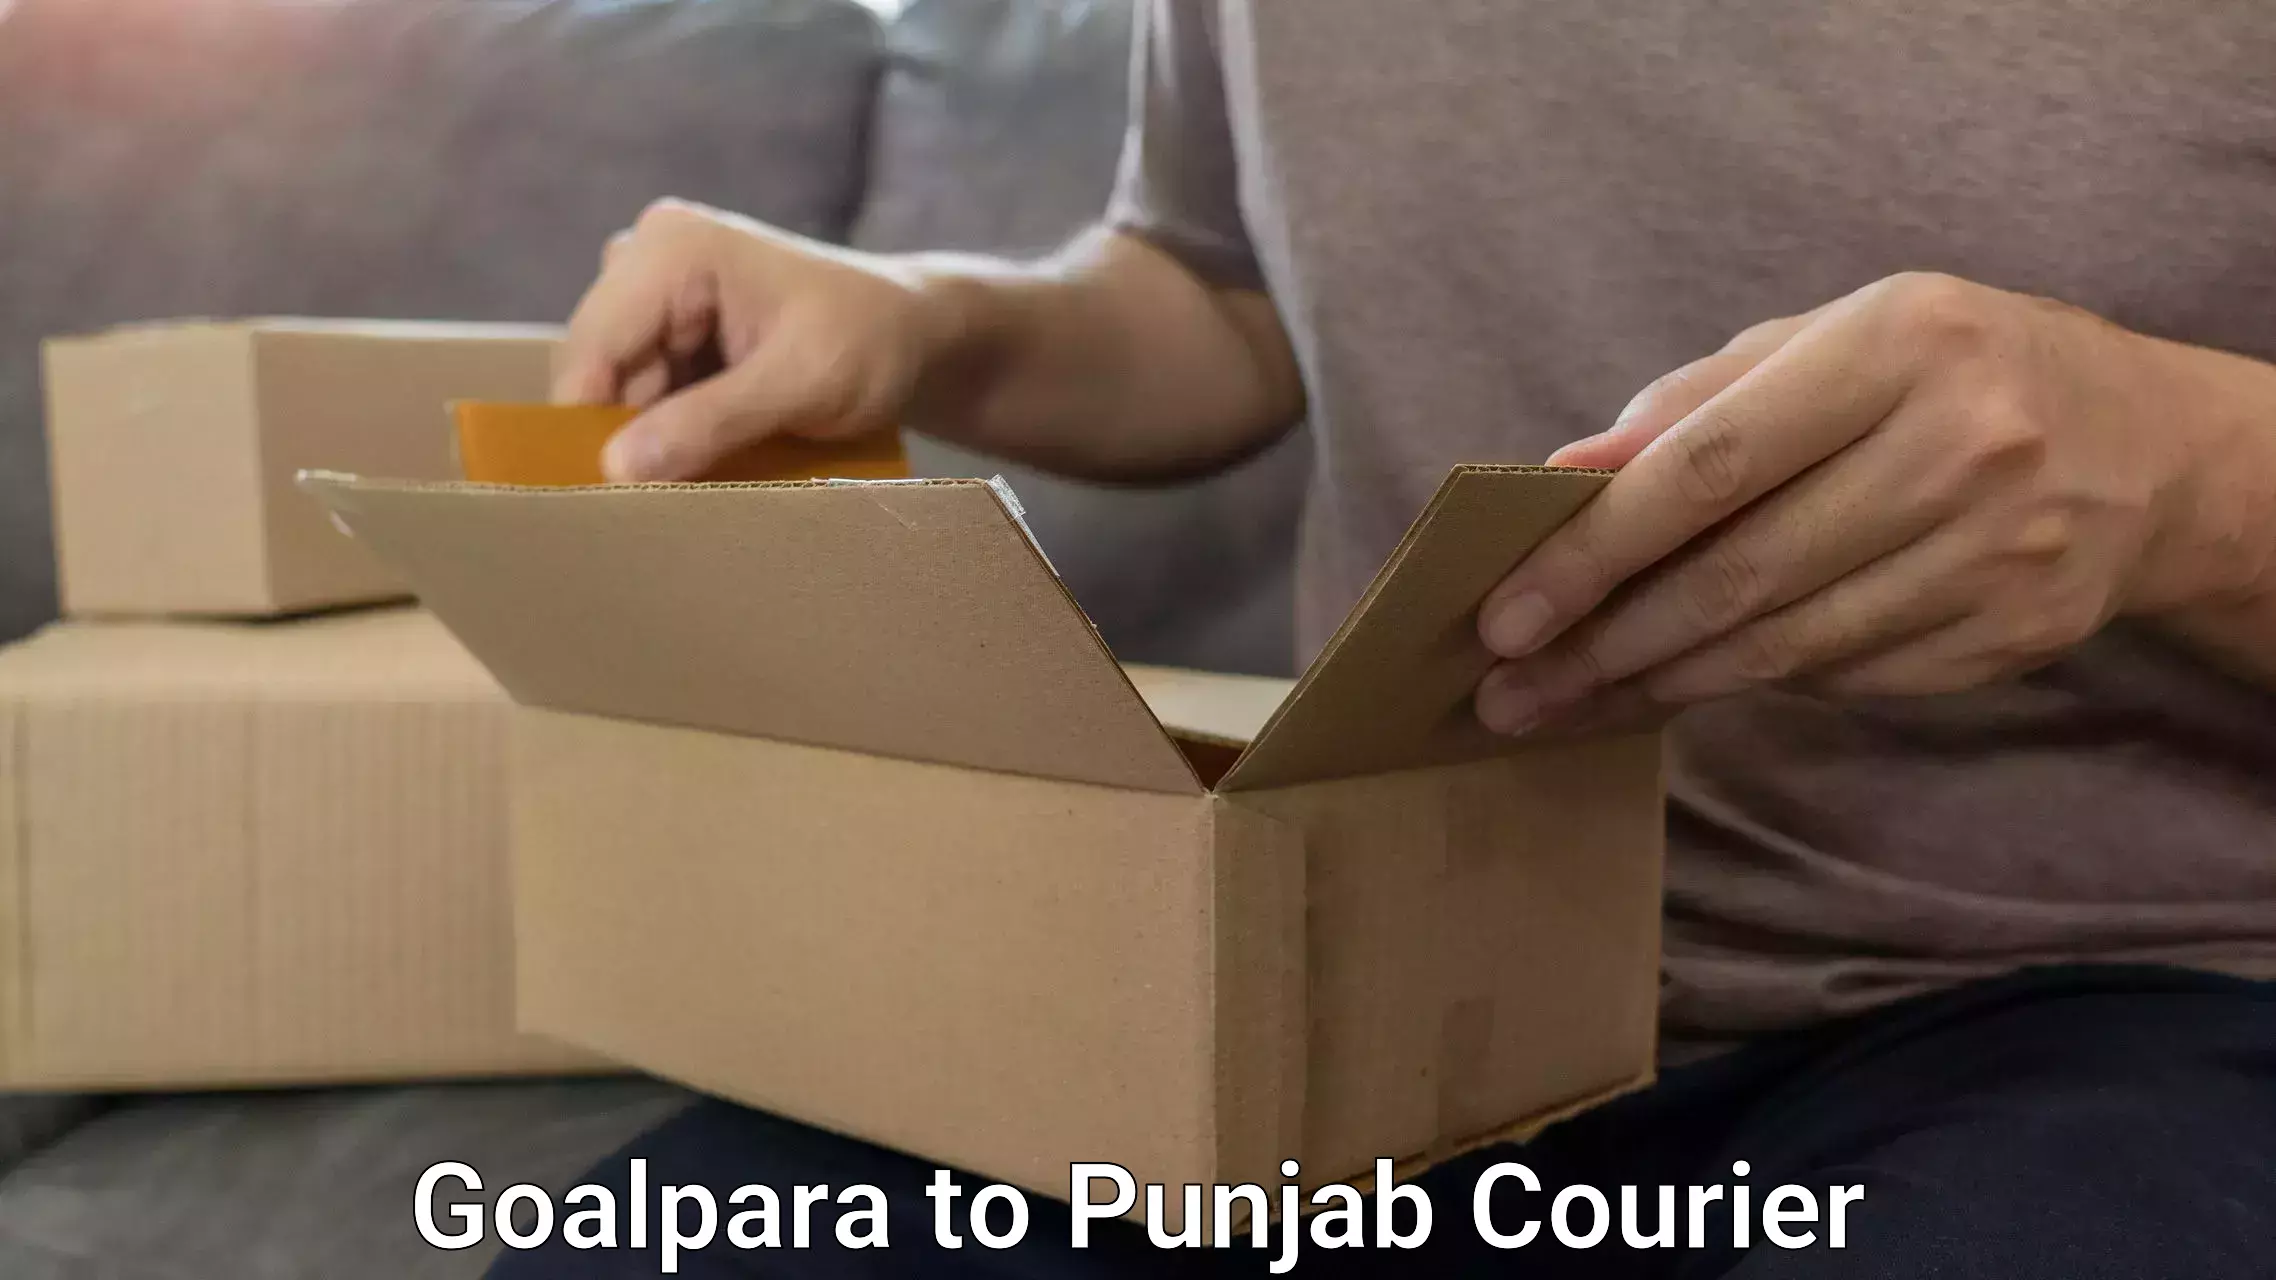 Luggage delivery app Goalpara to Ropar